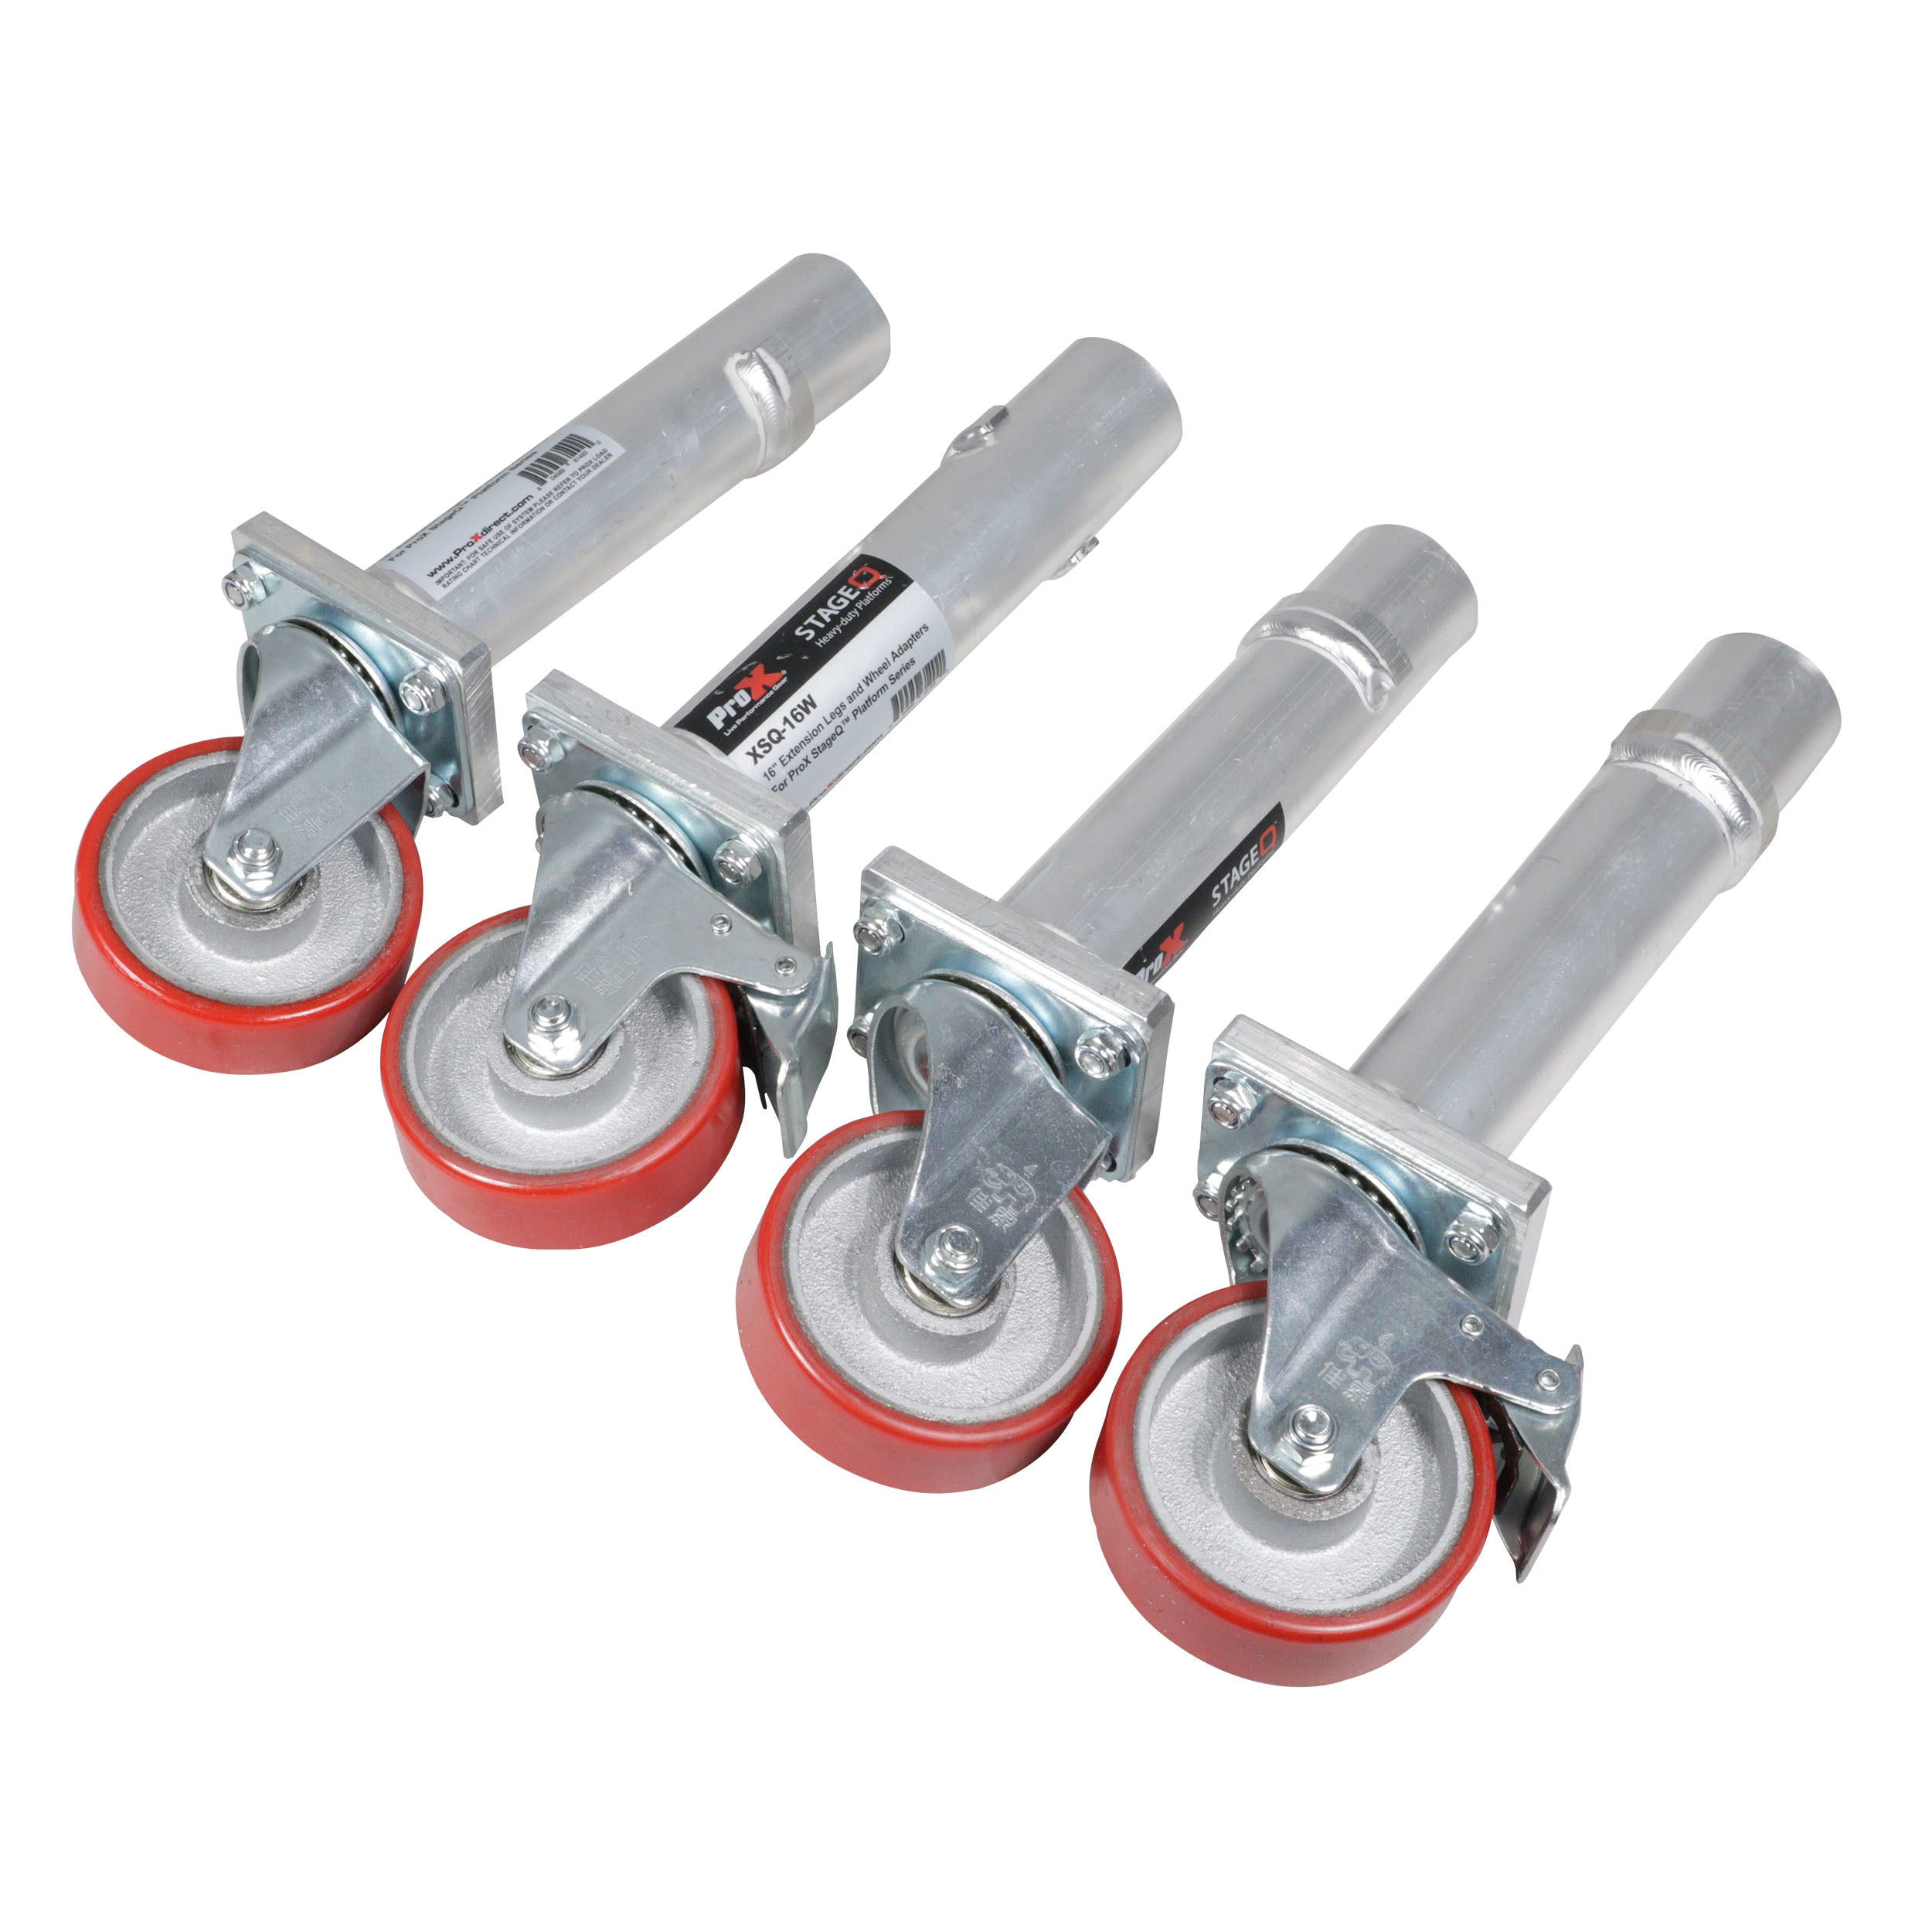 Pro X StageQ™ Locking Staging 16" Height Stage Legs with 5" Rubber Steel Casters | Set of 4